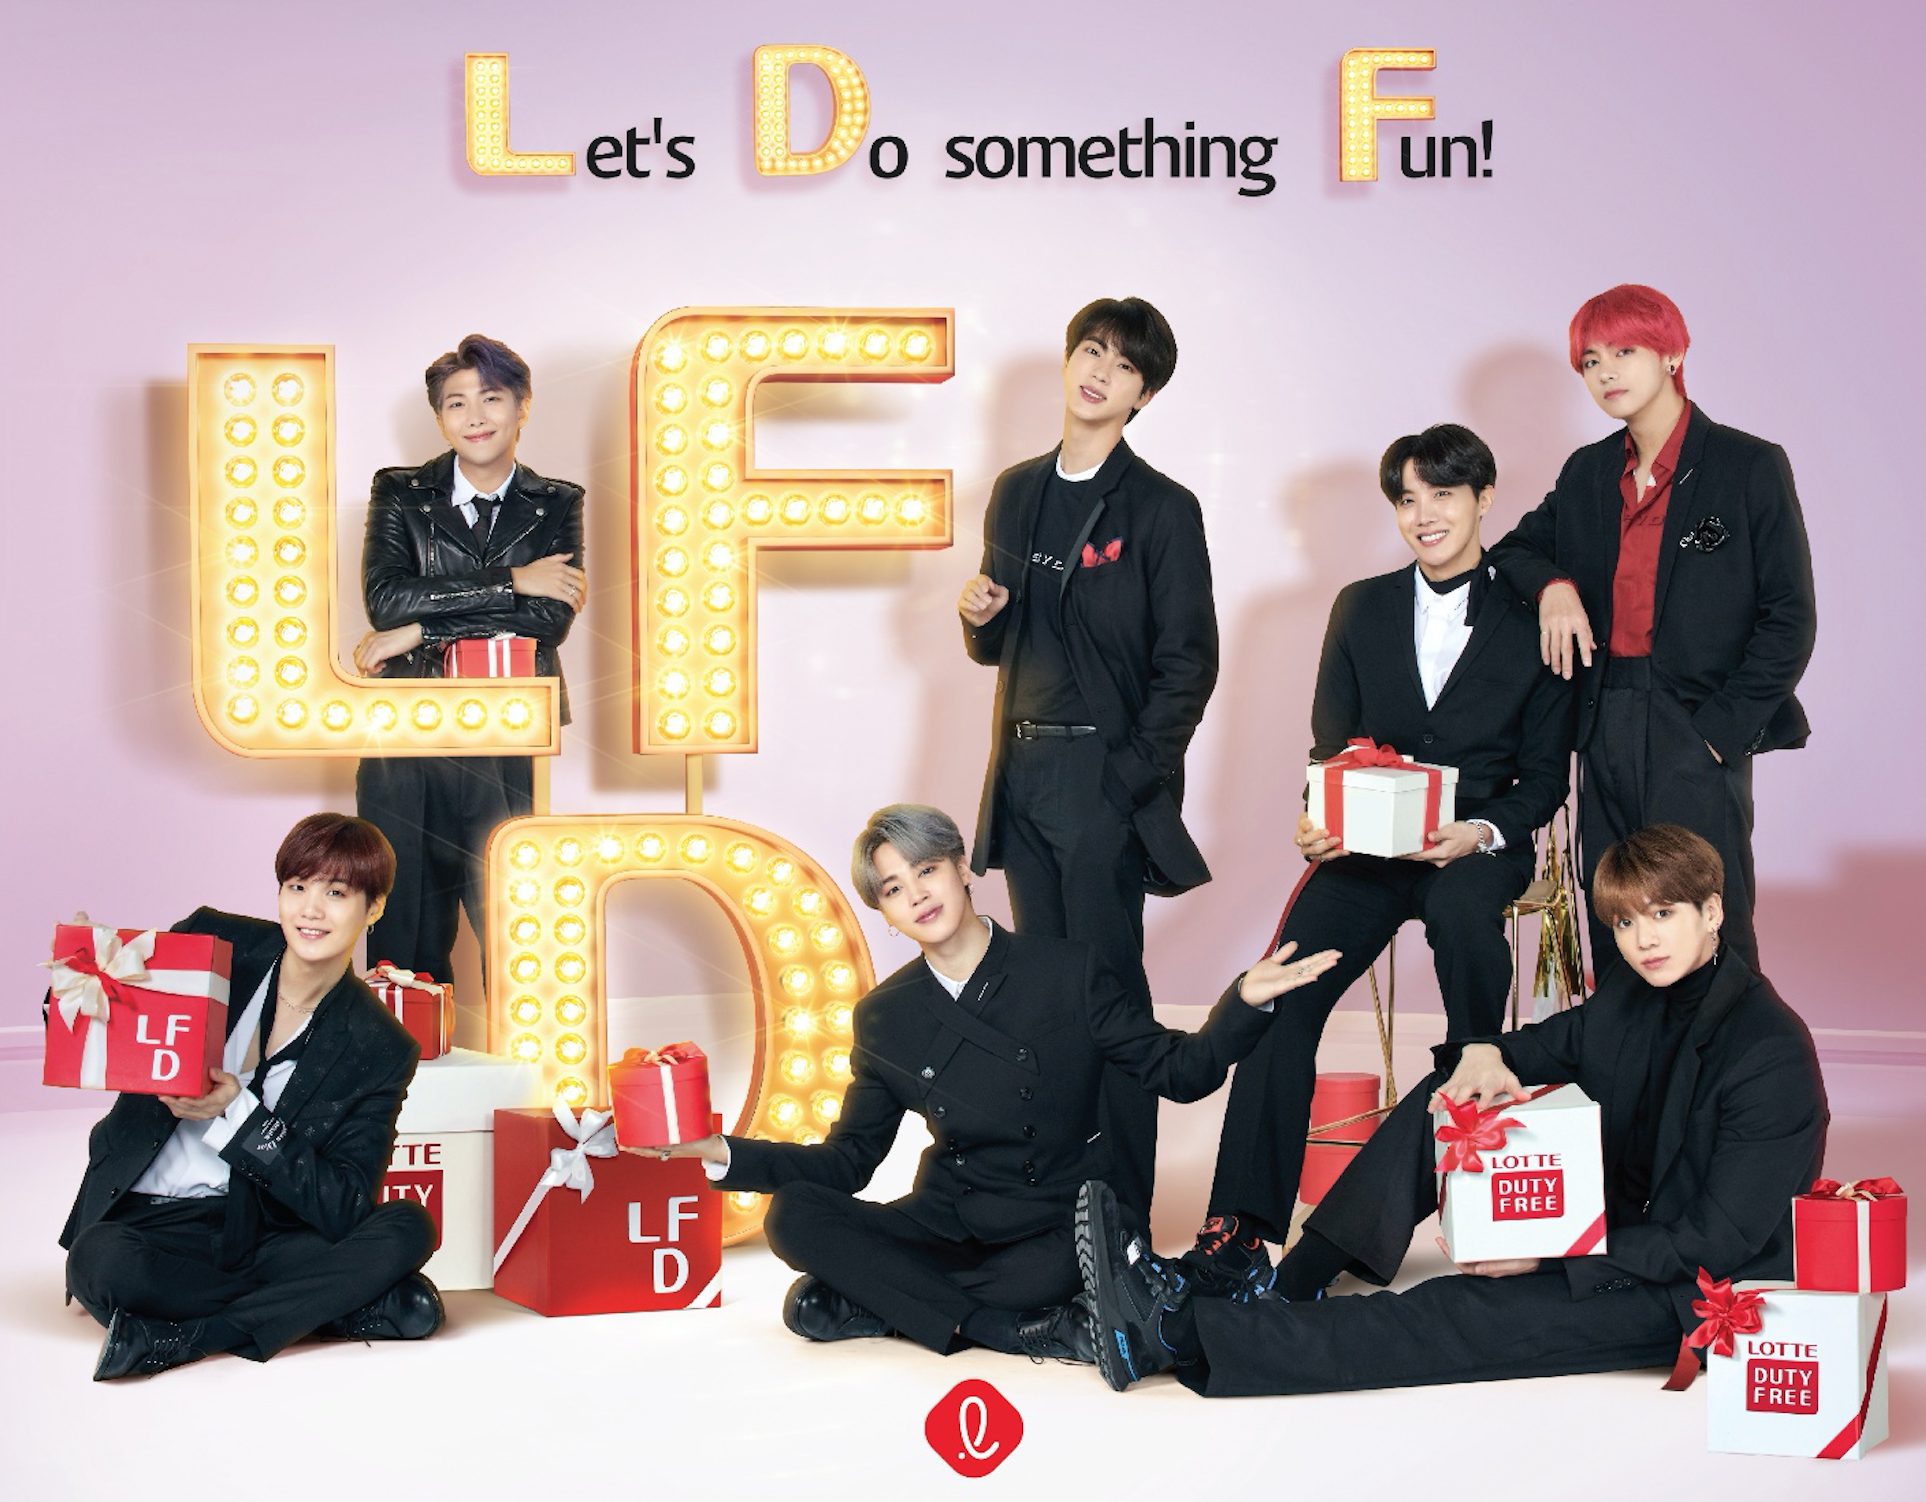 Lotte Duty Free's brand video featuring BTS snags spot in Top 20